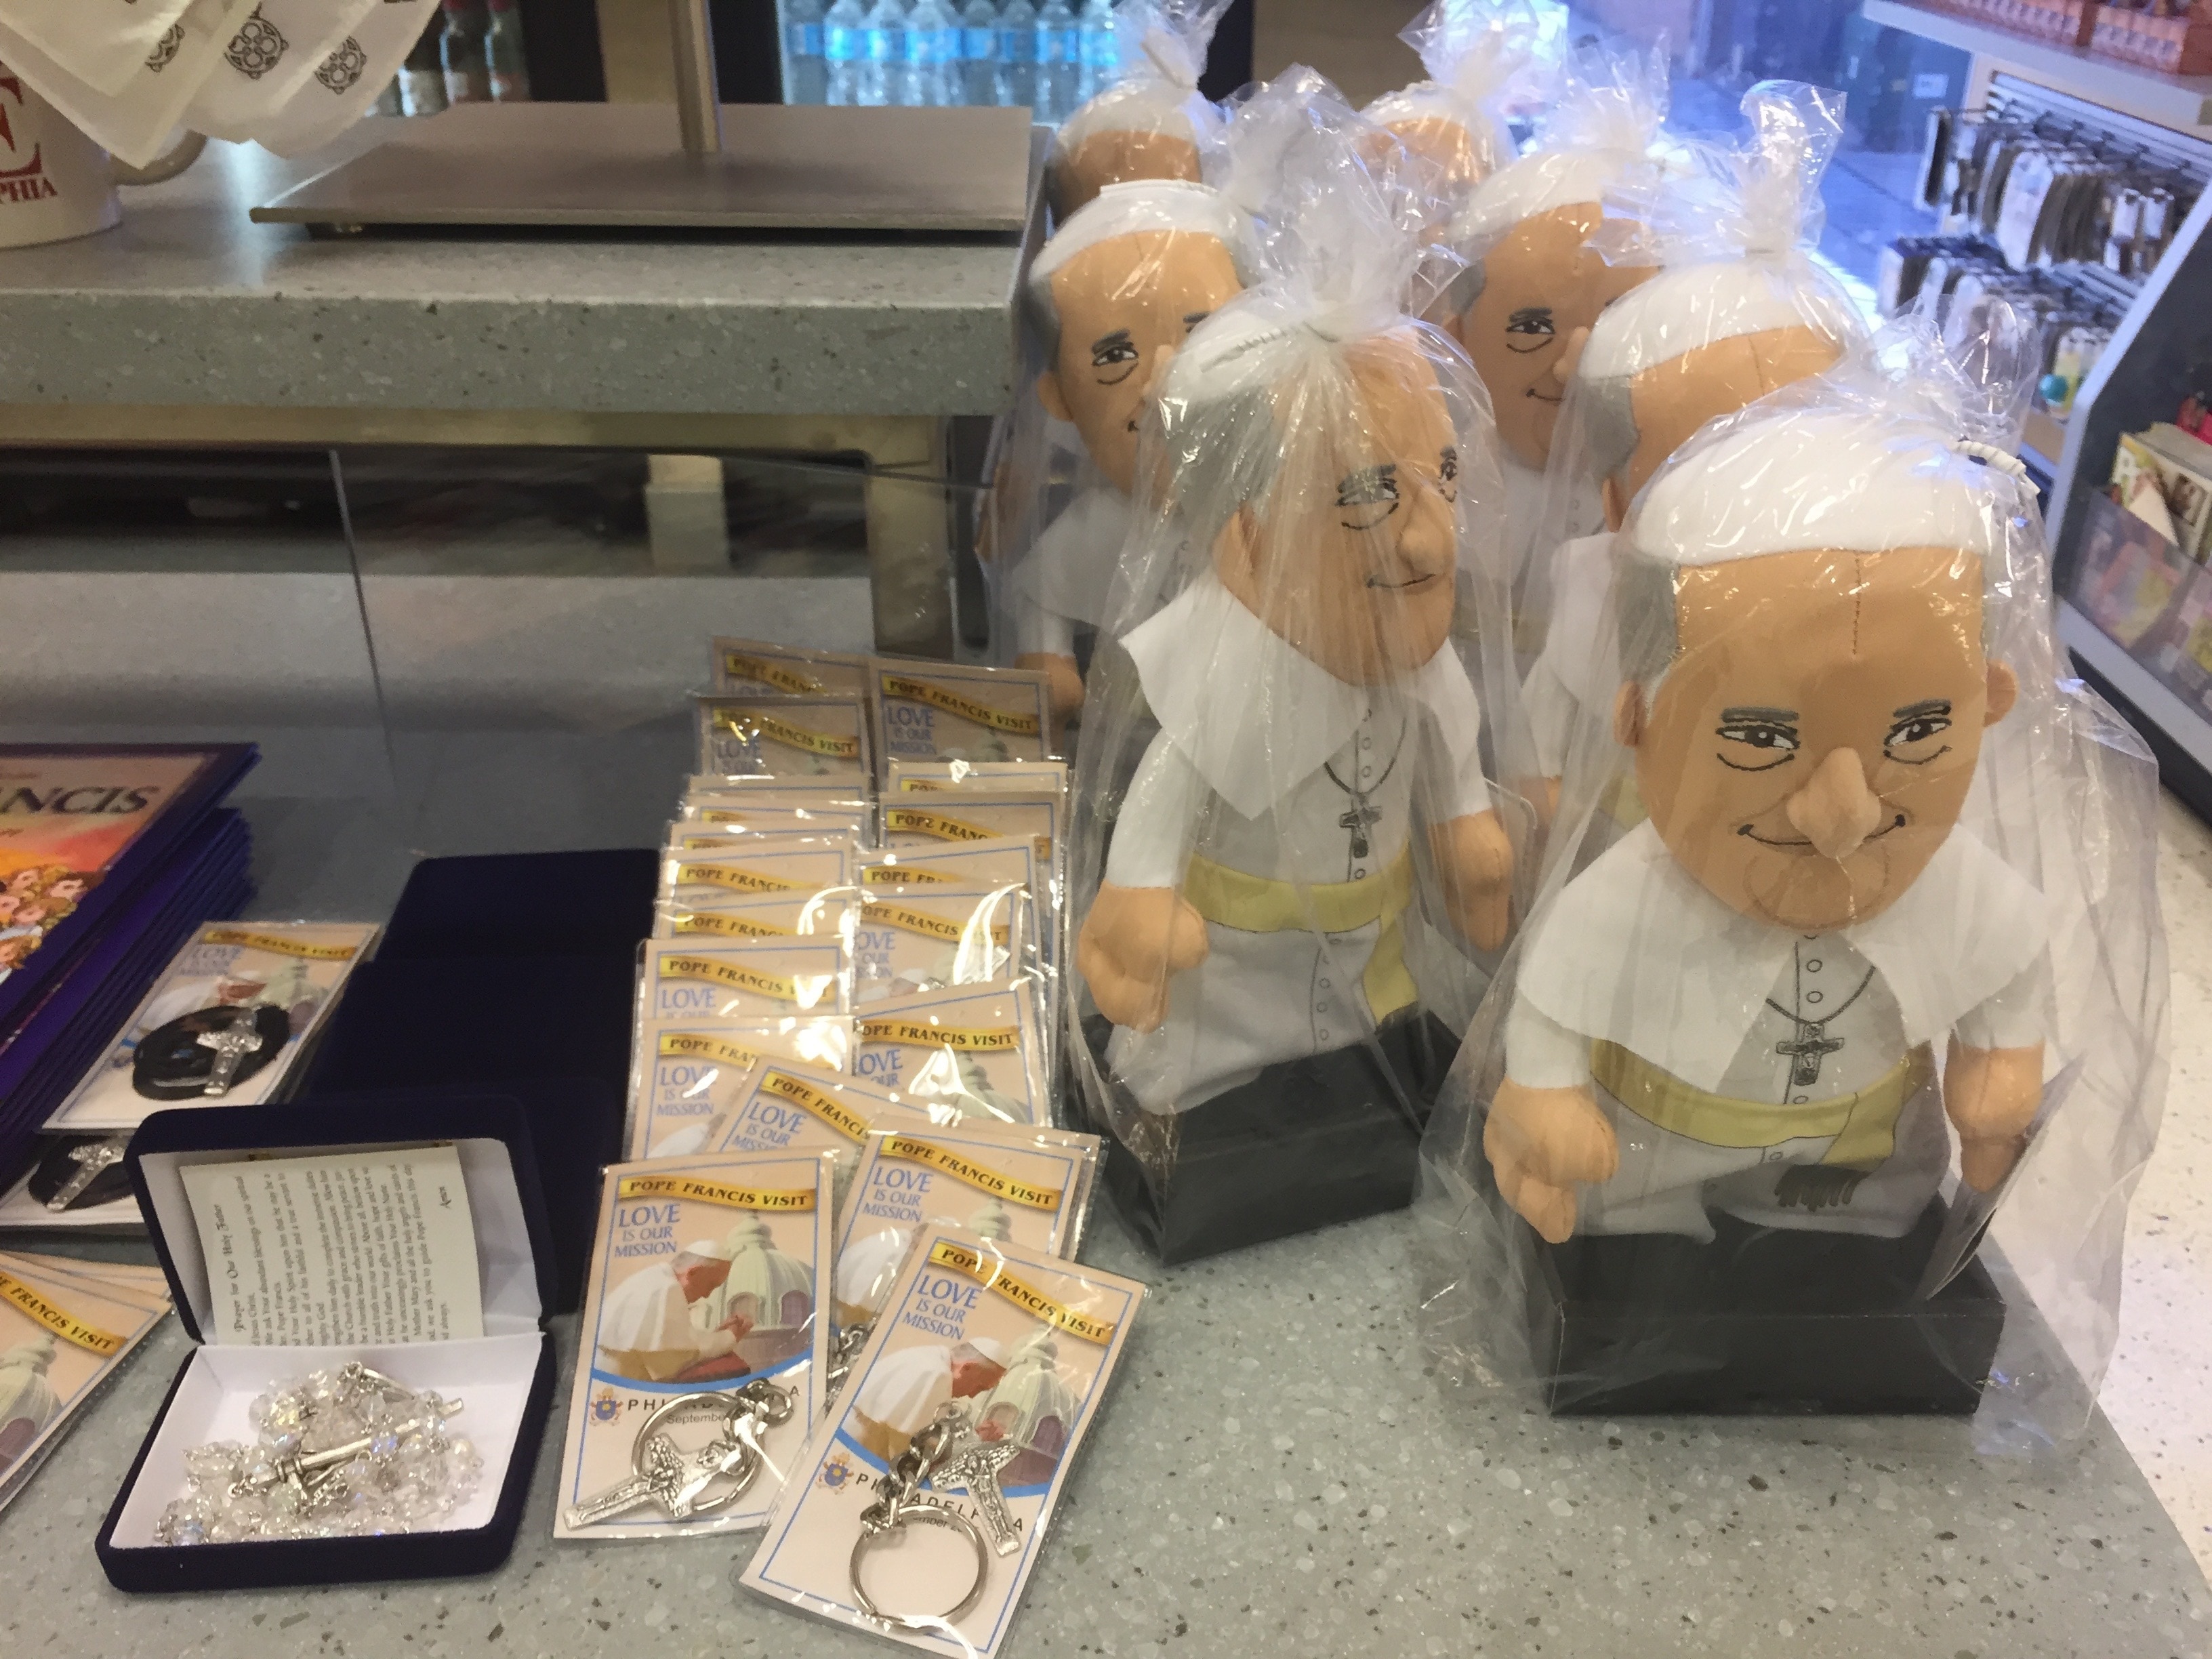 seven pope john paul plush toys  near keychains and rosary beads